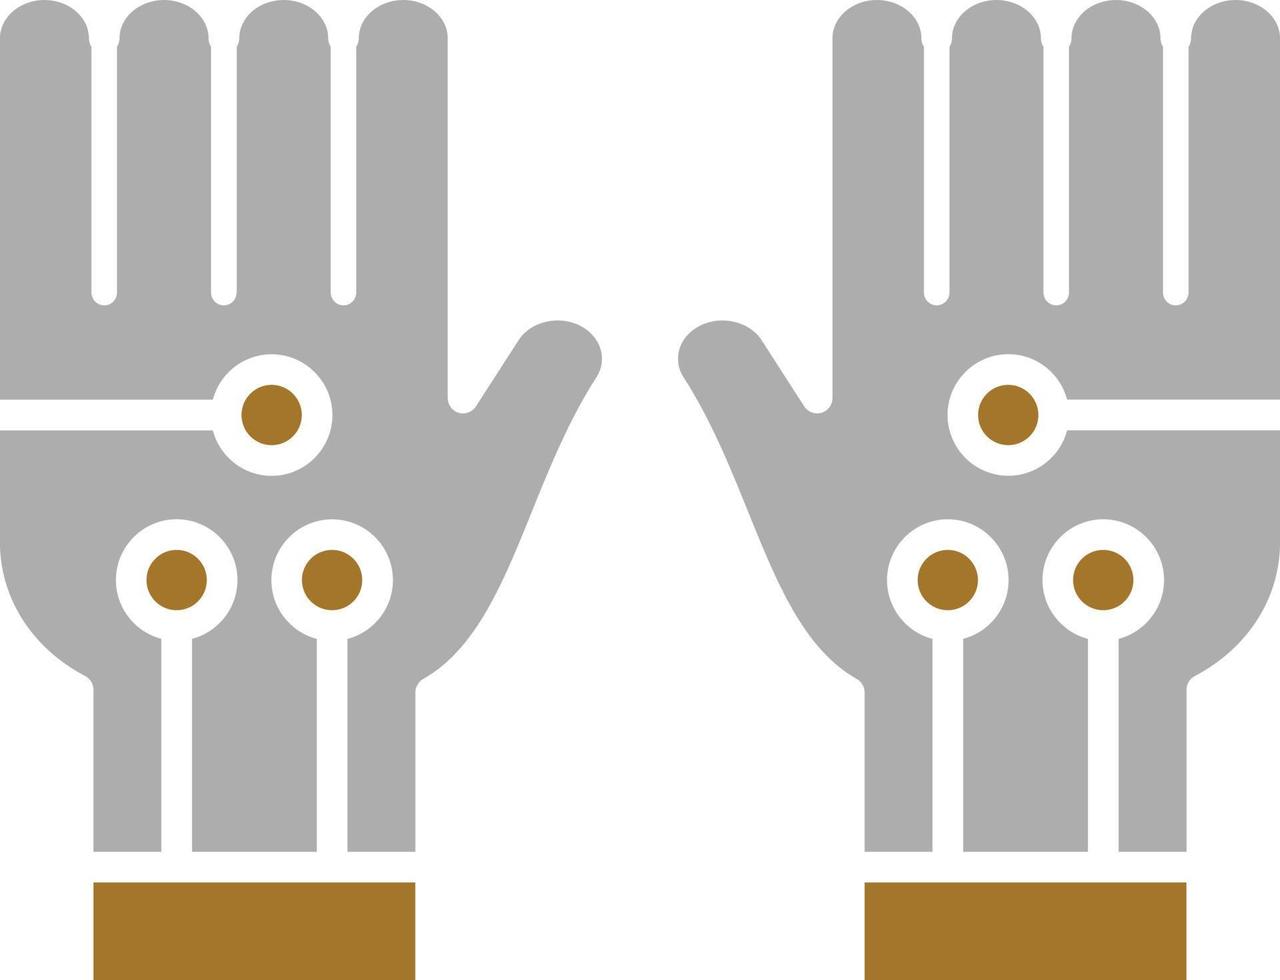 Wired Gloves Icon Style vector